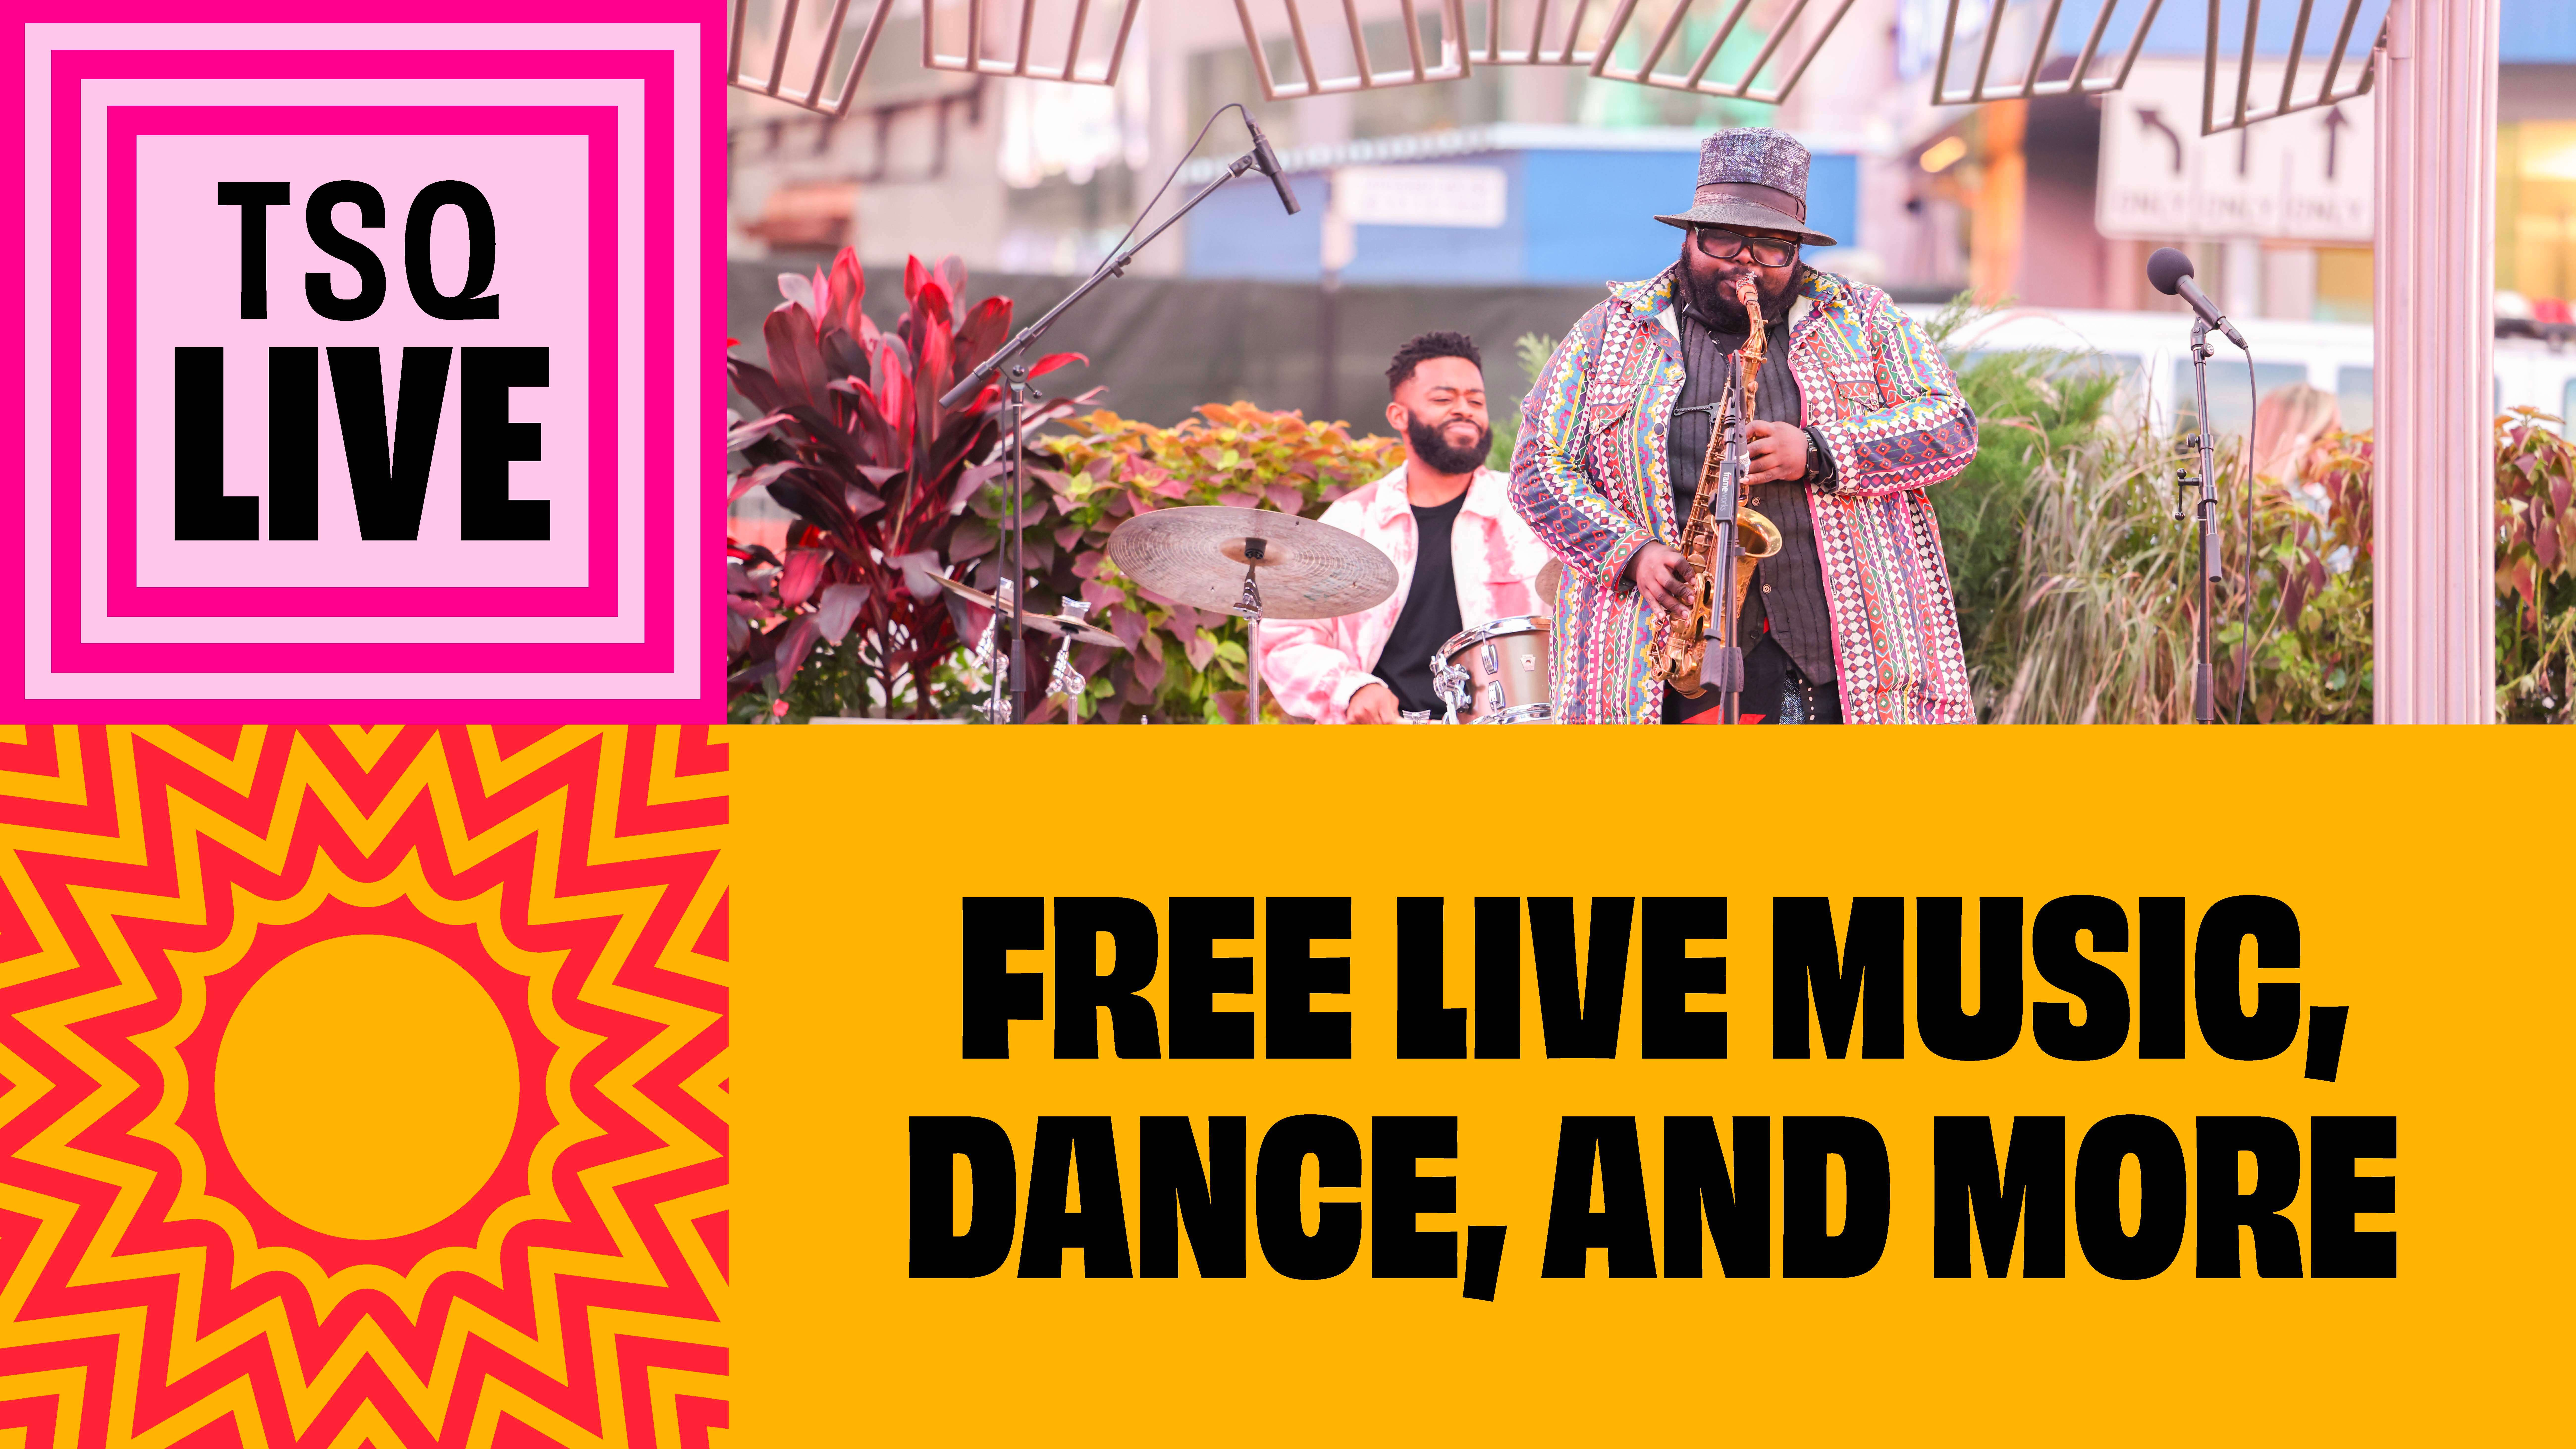 TSQ Live: Free Live Music, Dance, and More